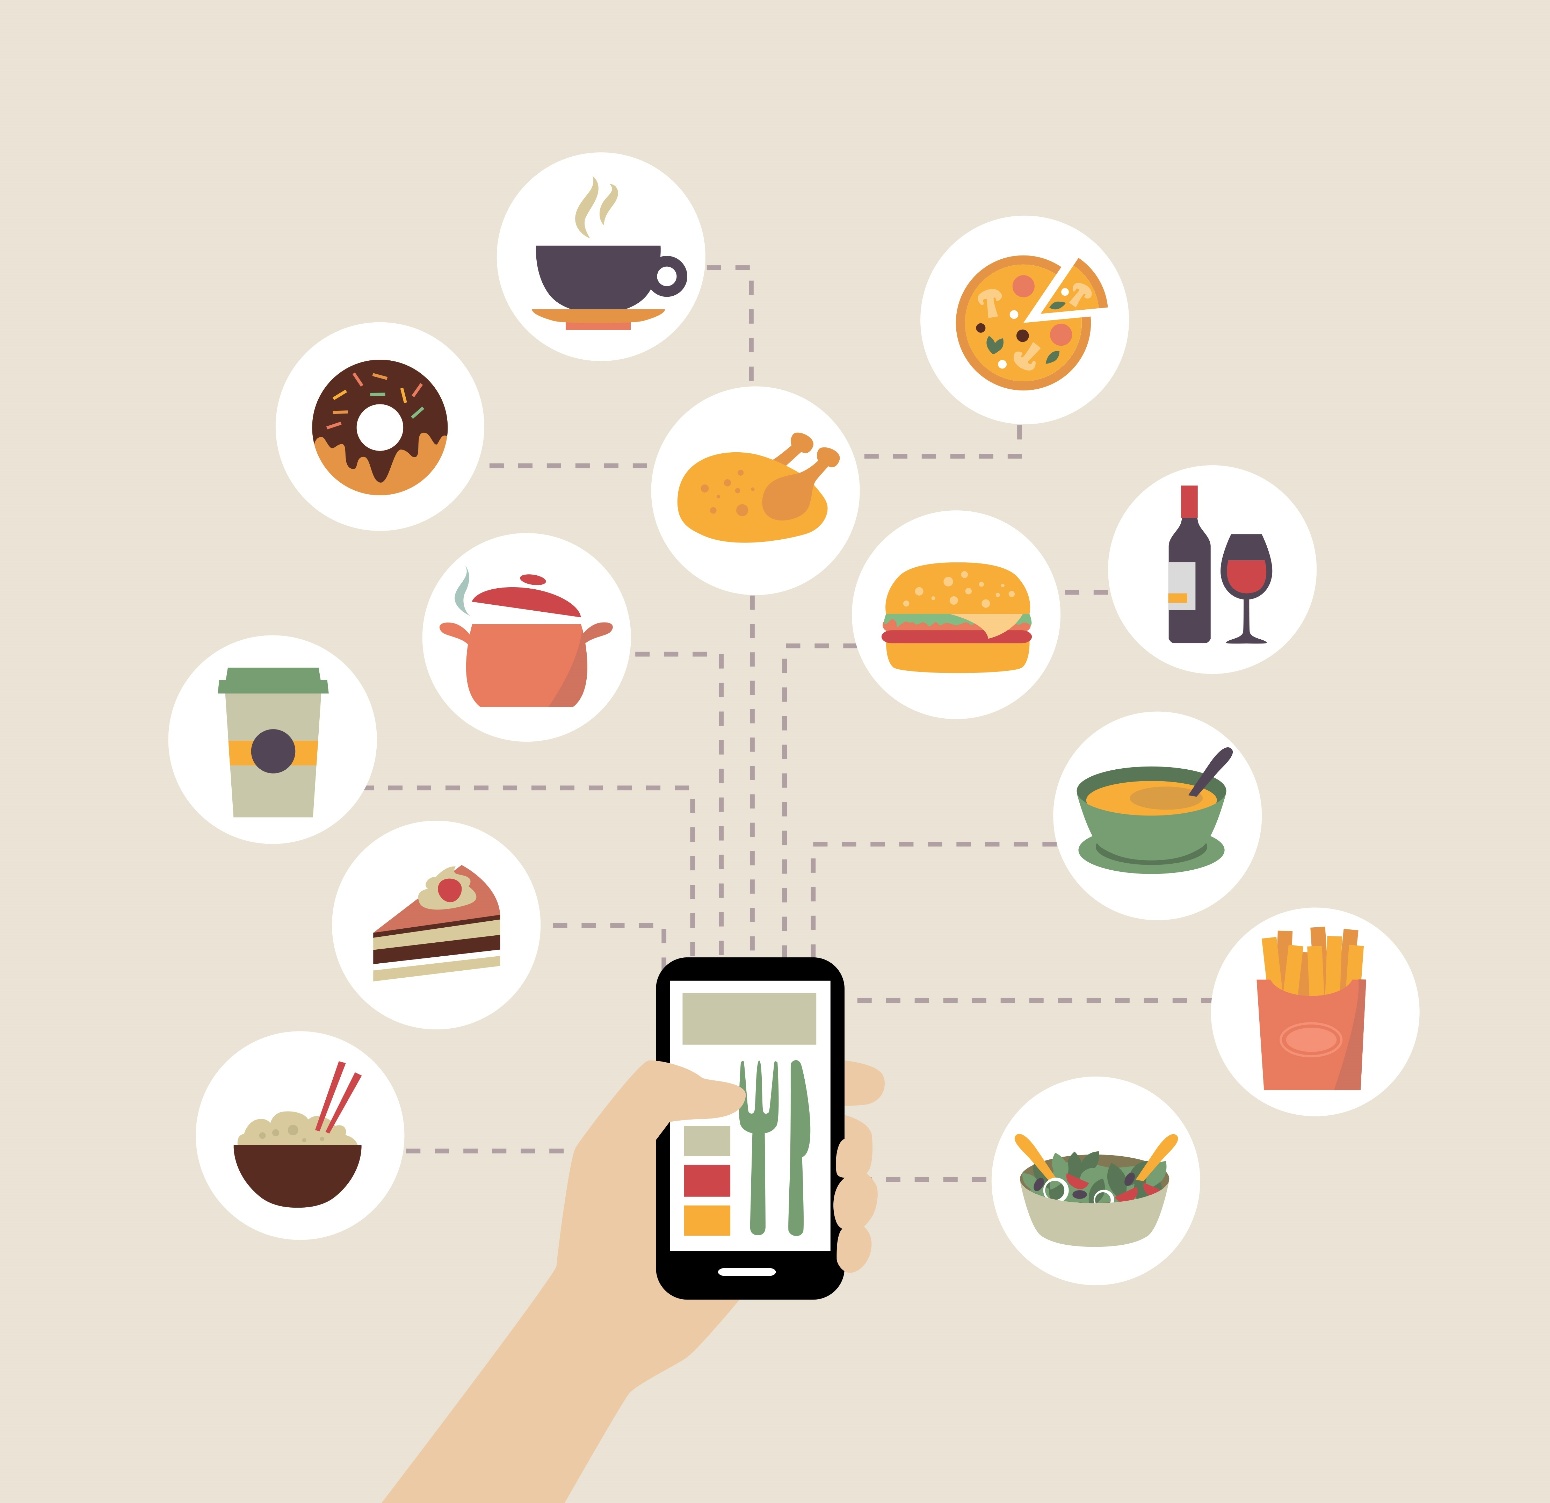 United States Online Food Delivery Market Demand, Size, Share, Scope & Forecast To 2032